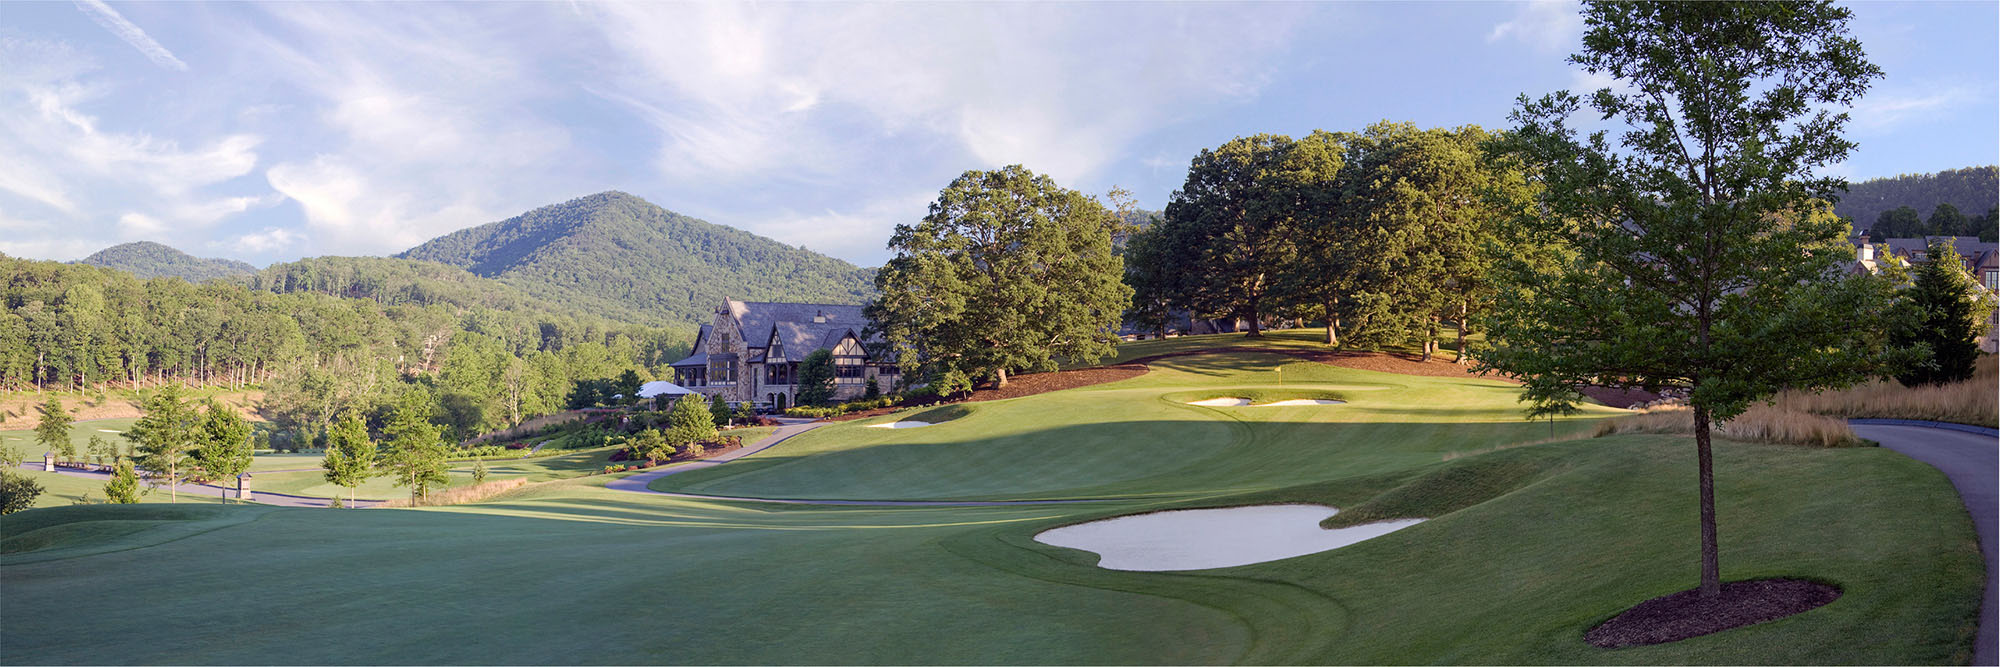 Golf Course Image - The Cliffs at Walnut Cove No. 9